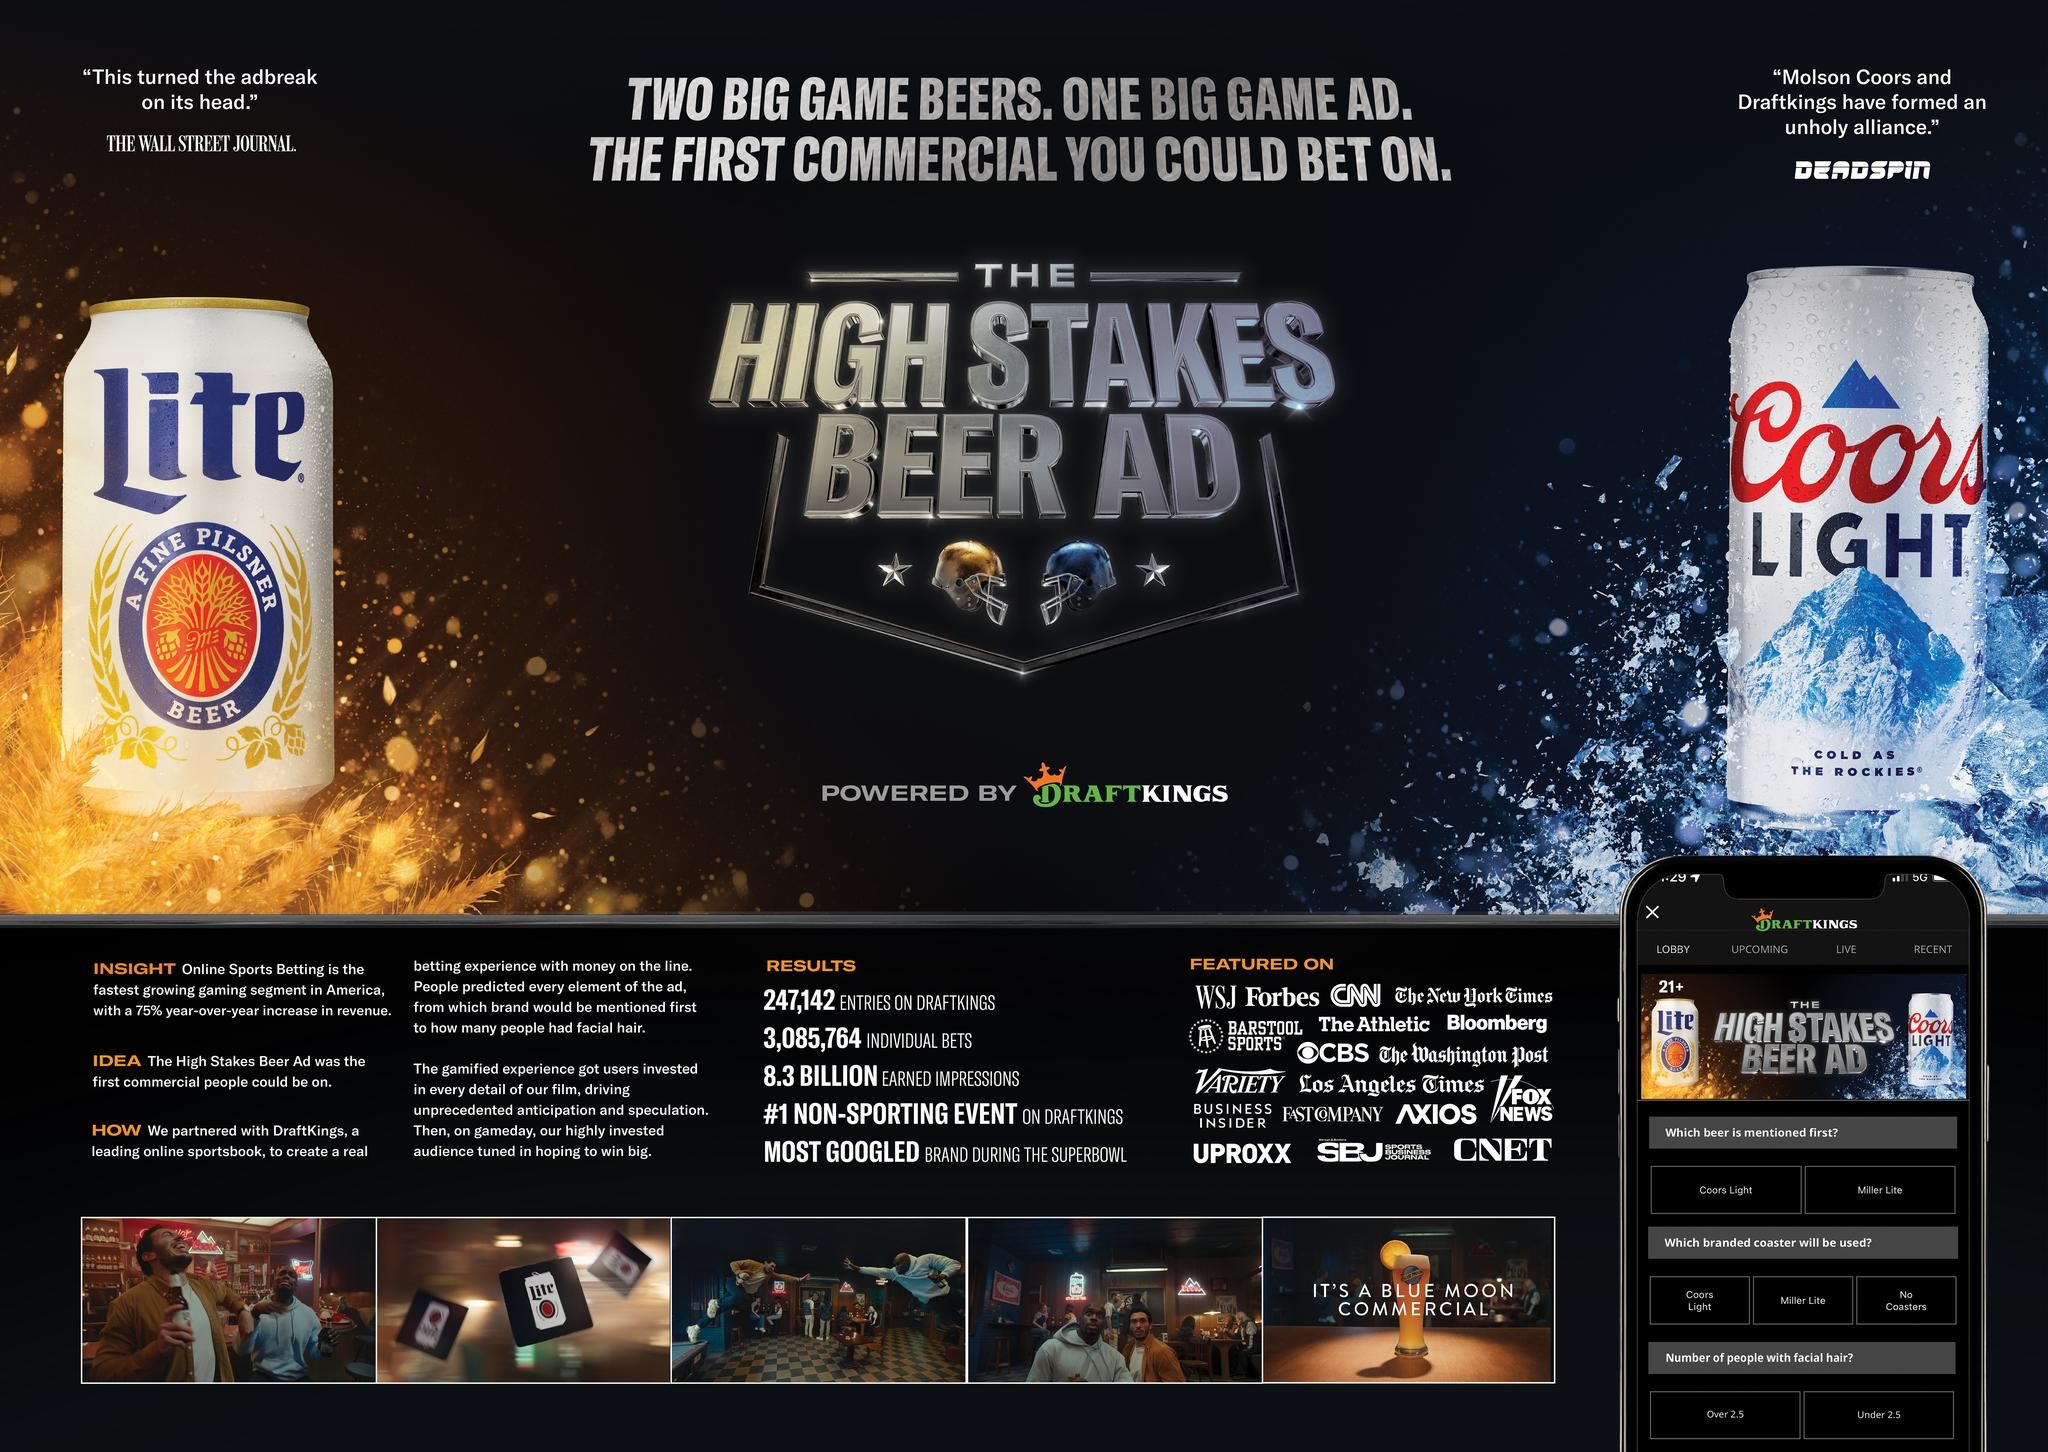 The High Stakes Beer Ad